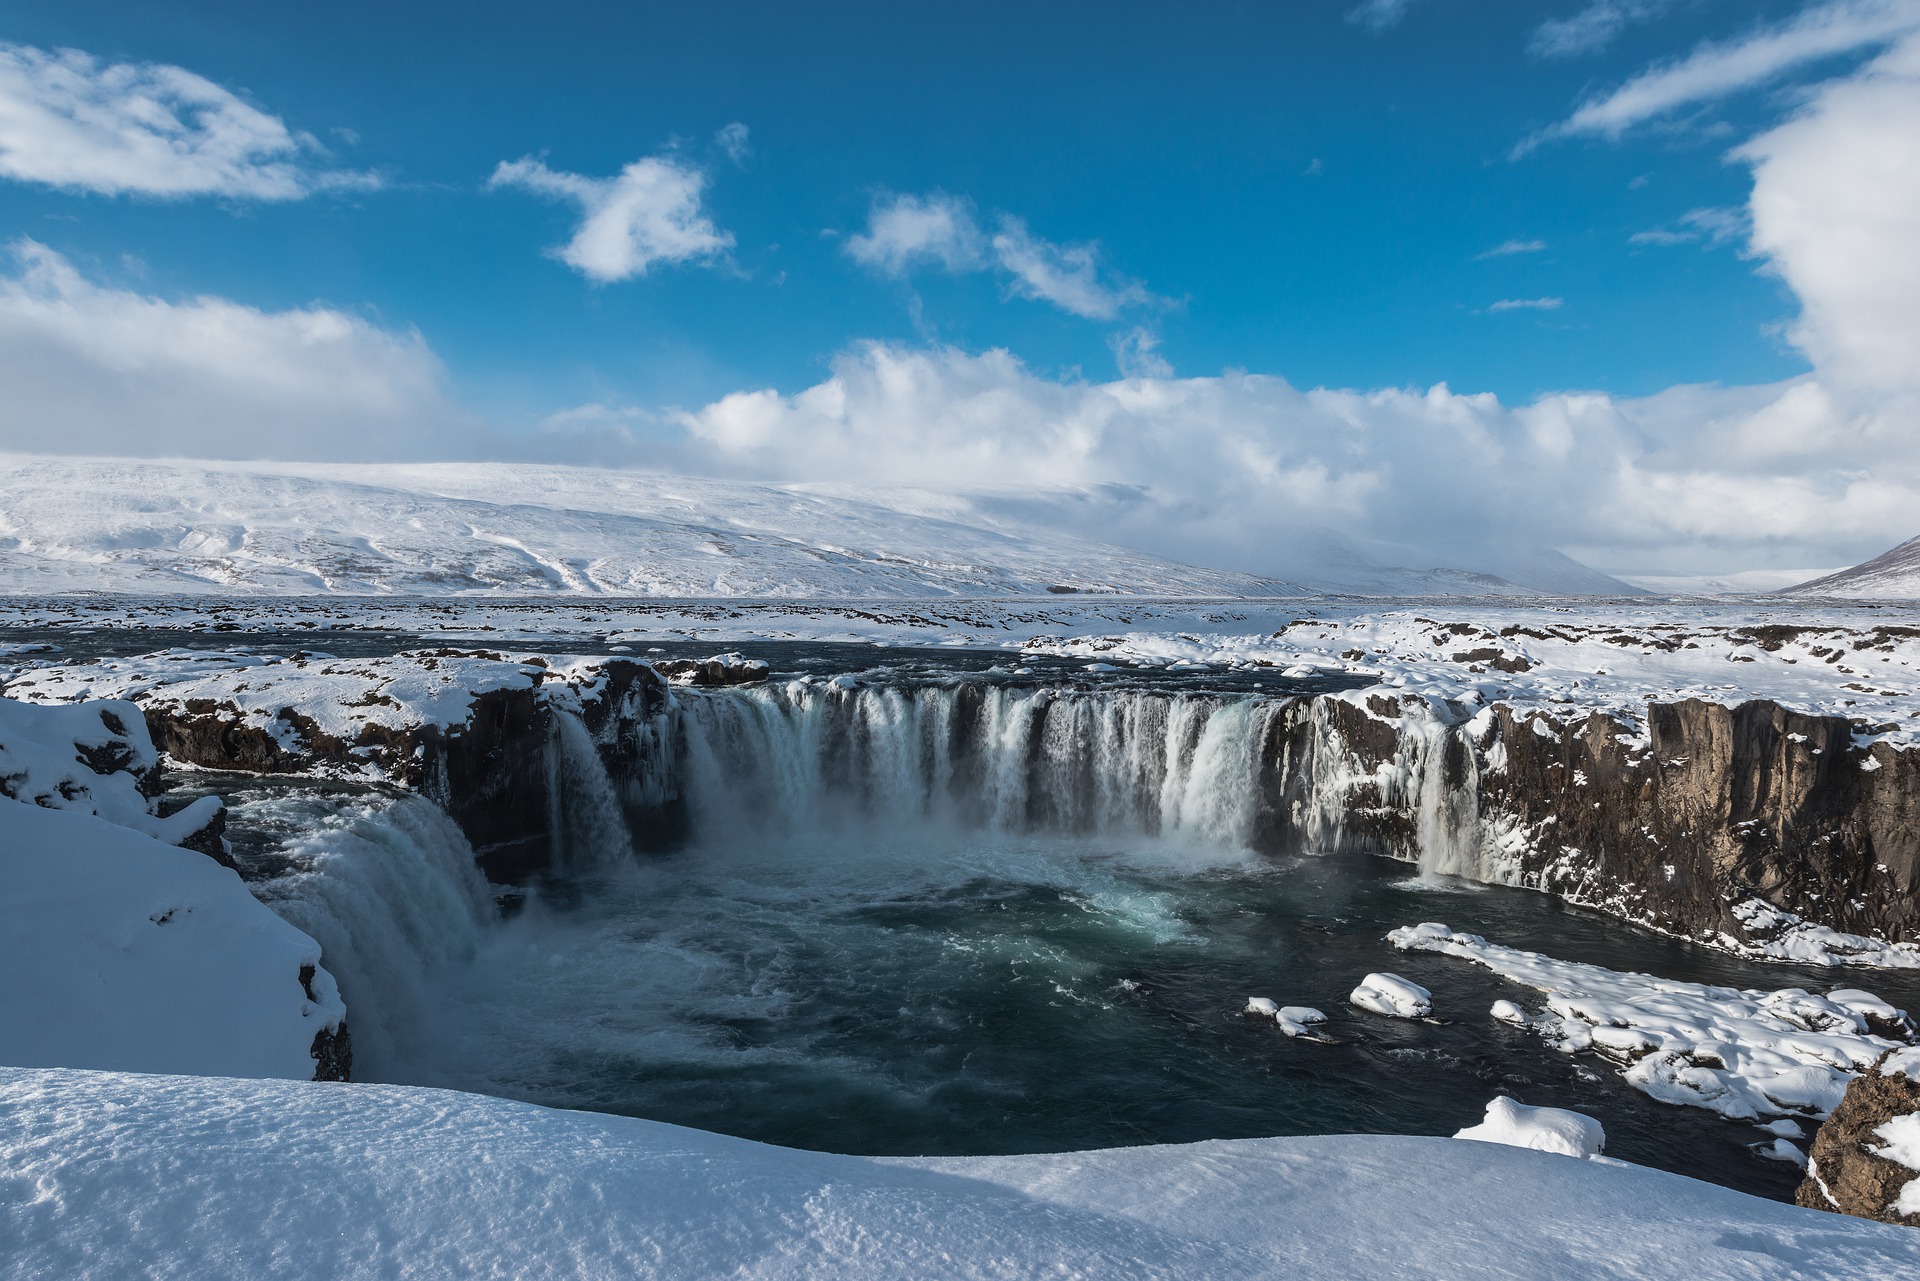 godafoss waterfall during winter with snow